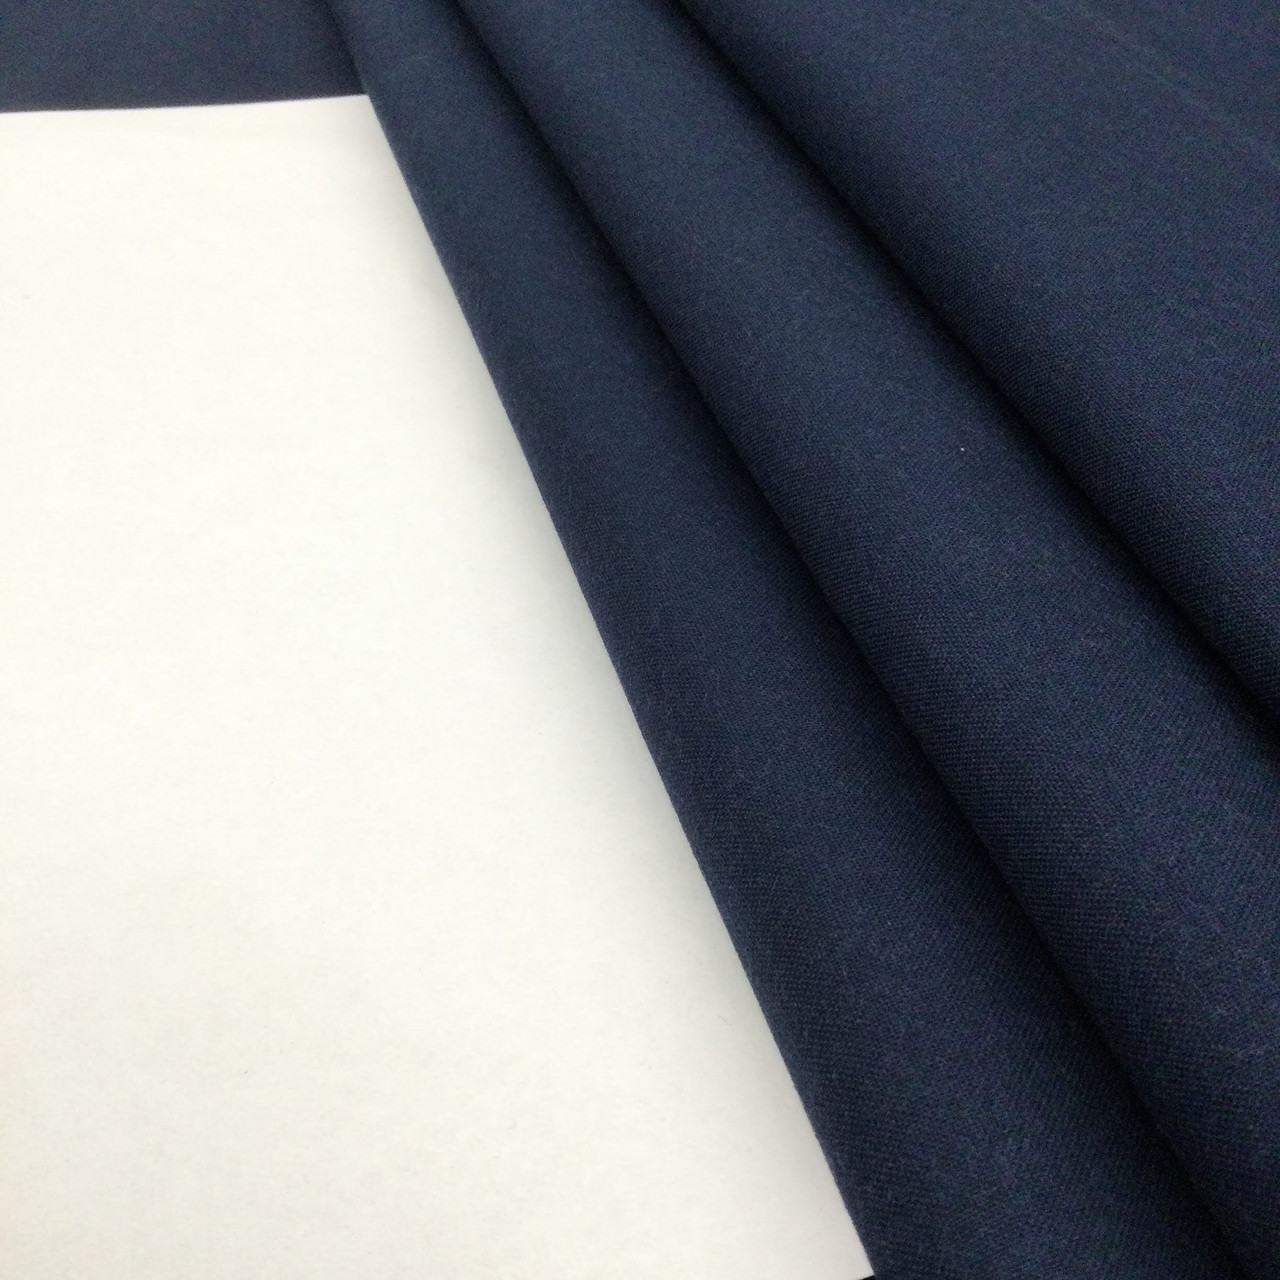  Terry Cloth Cotton Fabric / 56 Wide/Sold by The Yard (16 oz,  Navy)